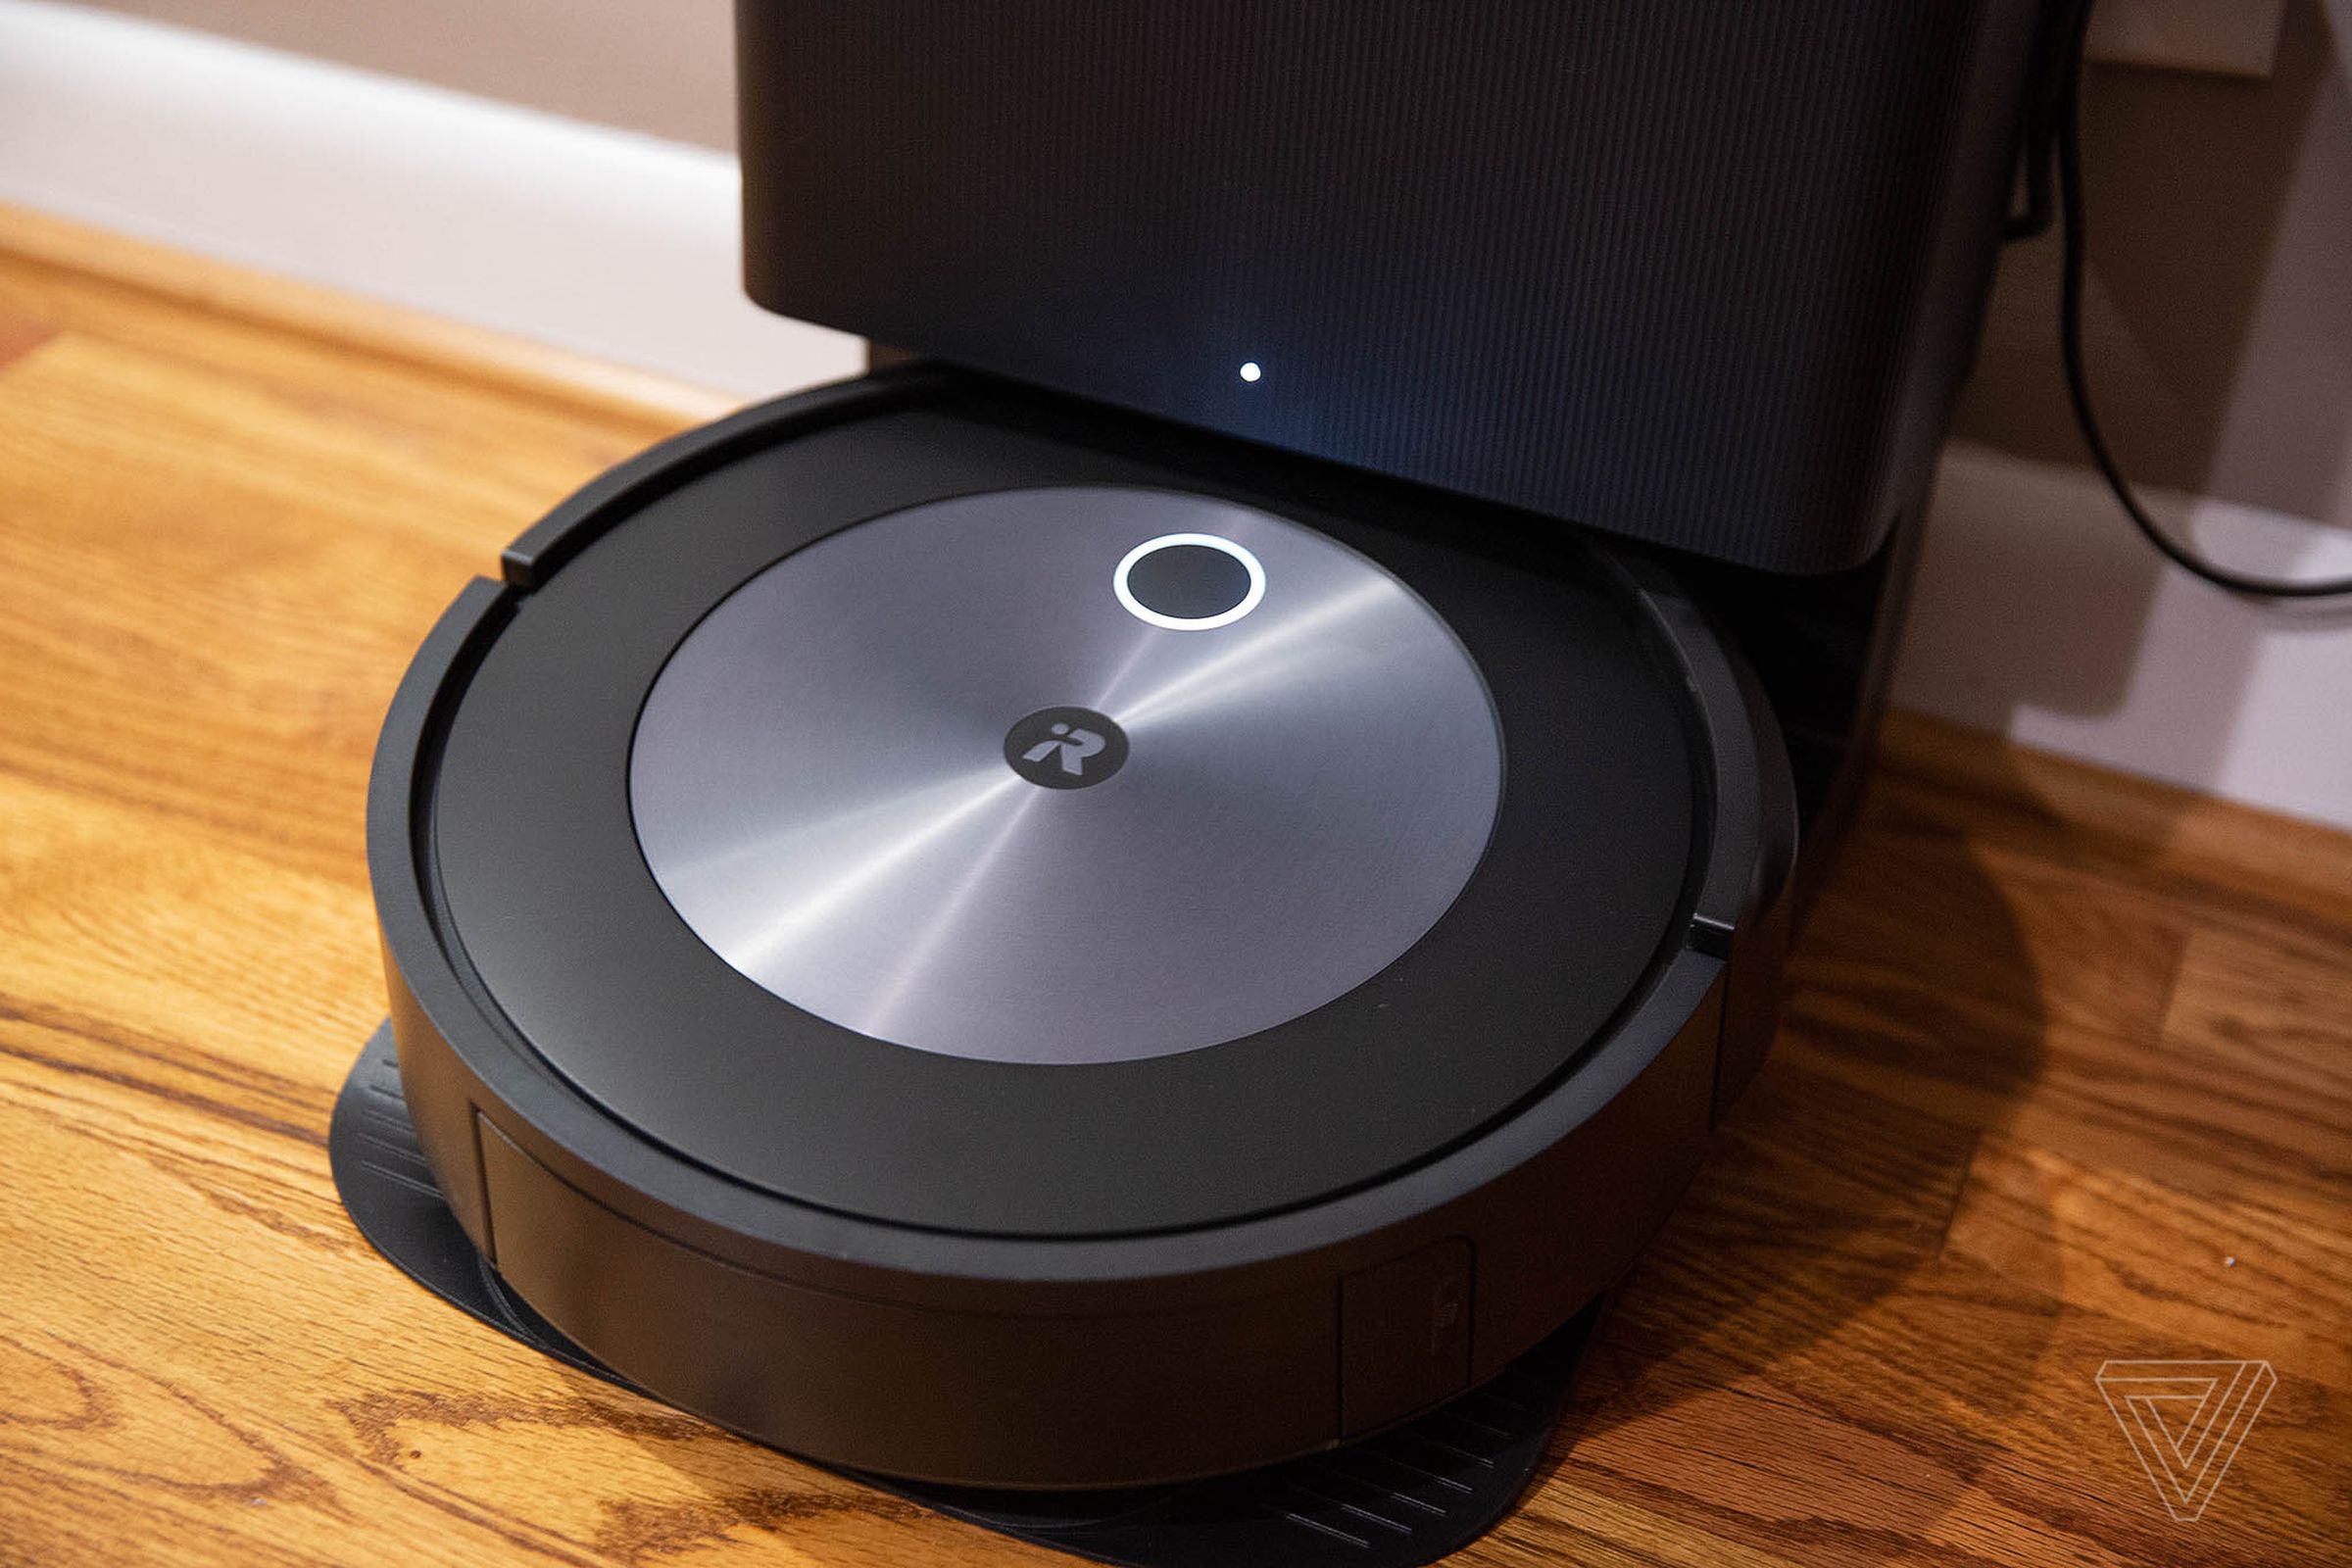 The iRobot Roomba j7 standing up against the wall.